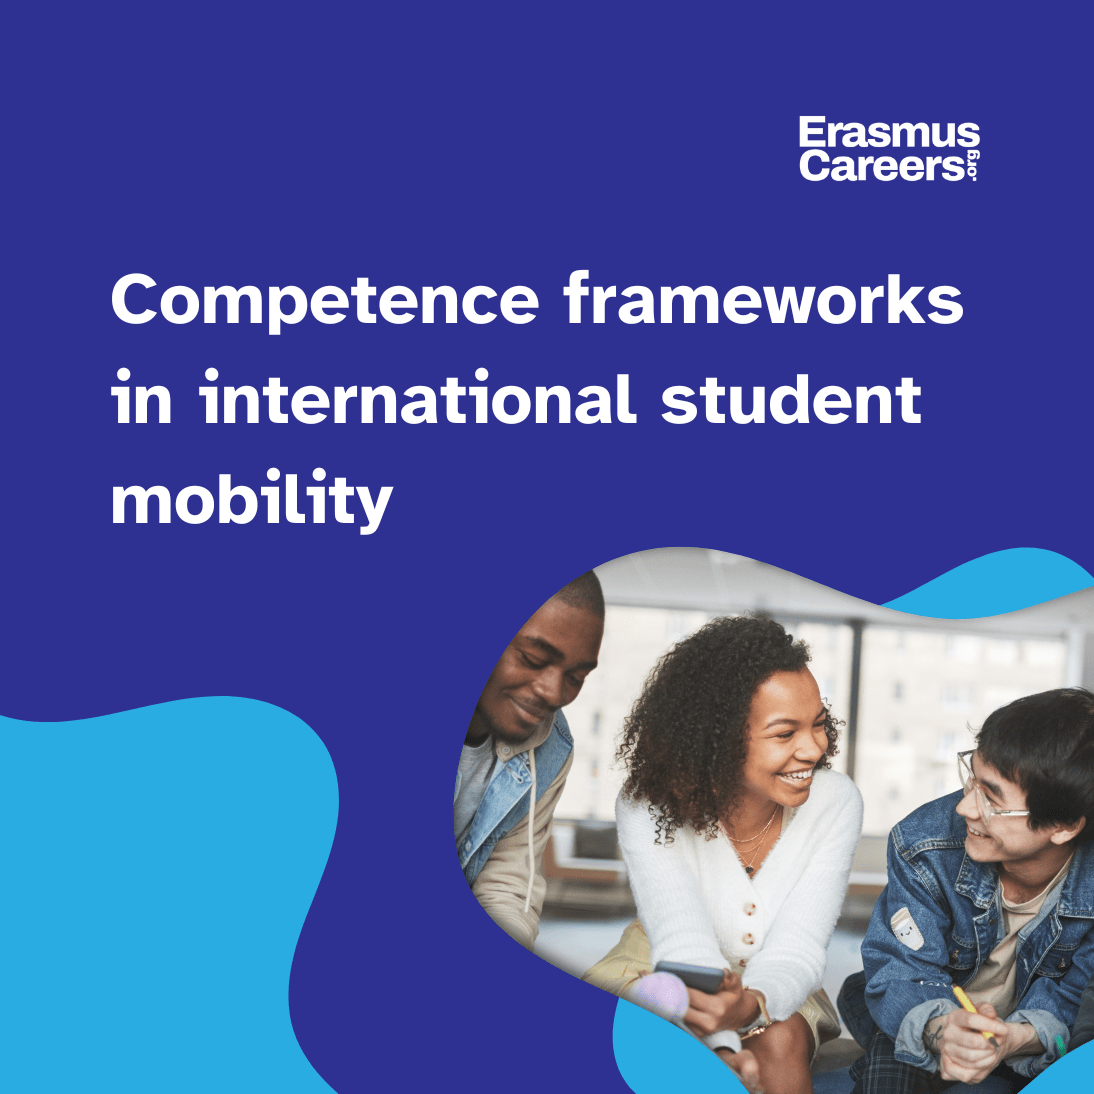 Desk research on competence framework and international student mobility